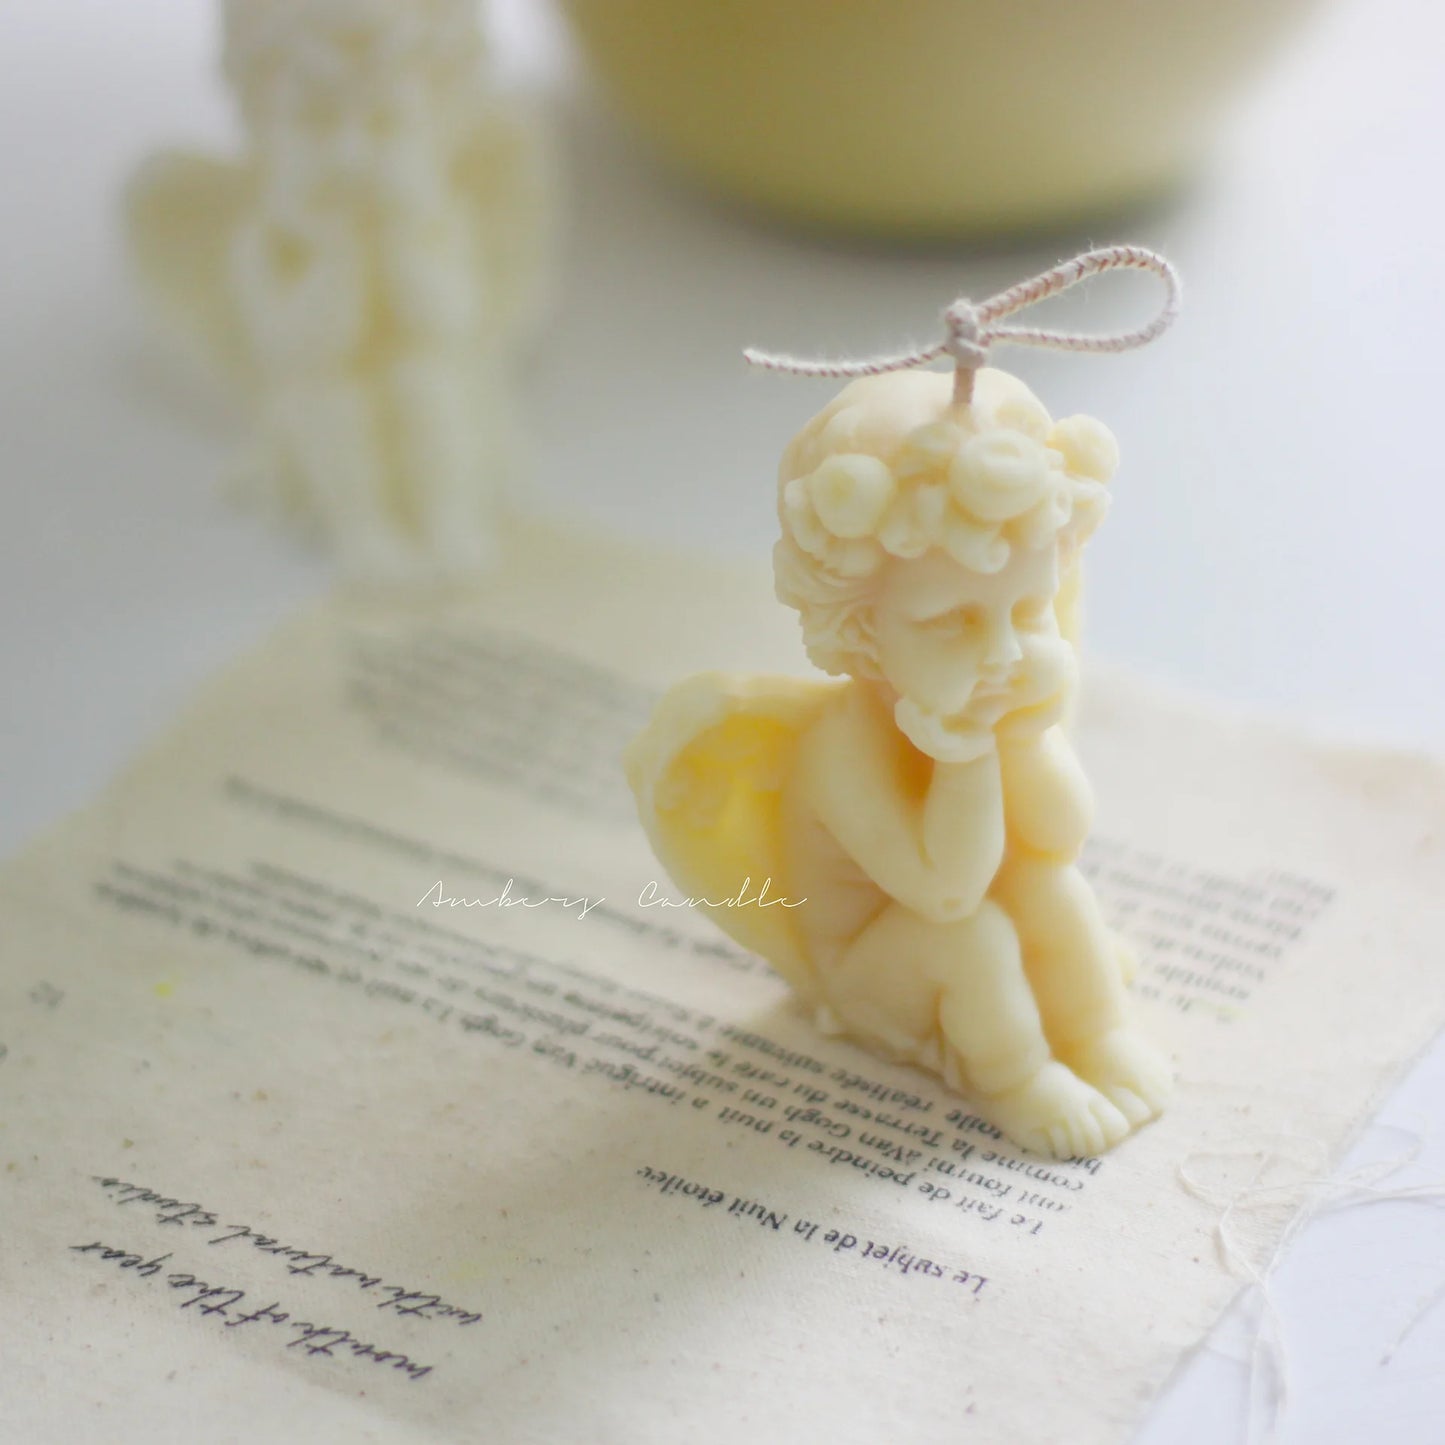 Cute Candles Cupid Angel Scented Candles Ins Small Art Decorative Aromatic Candles Home Fragrant Decoration Candles Posing Props